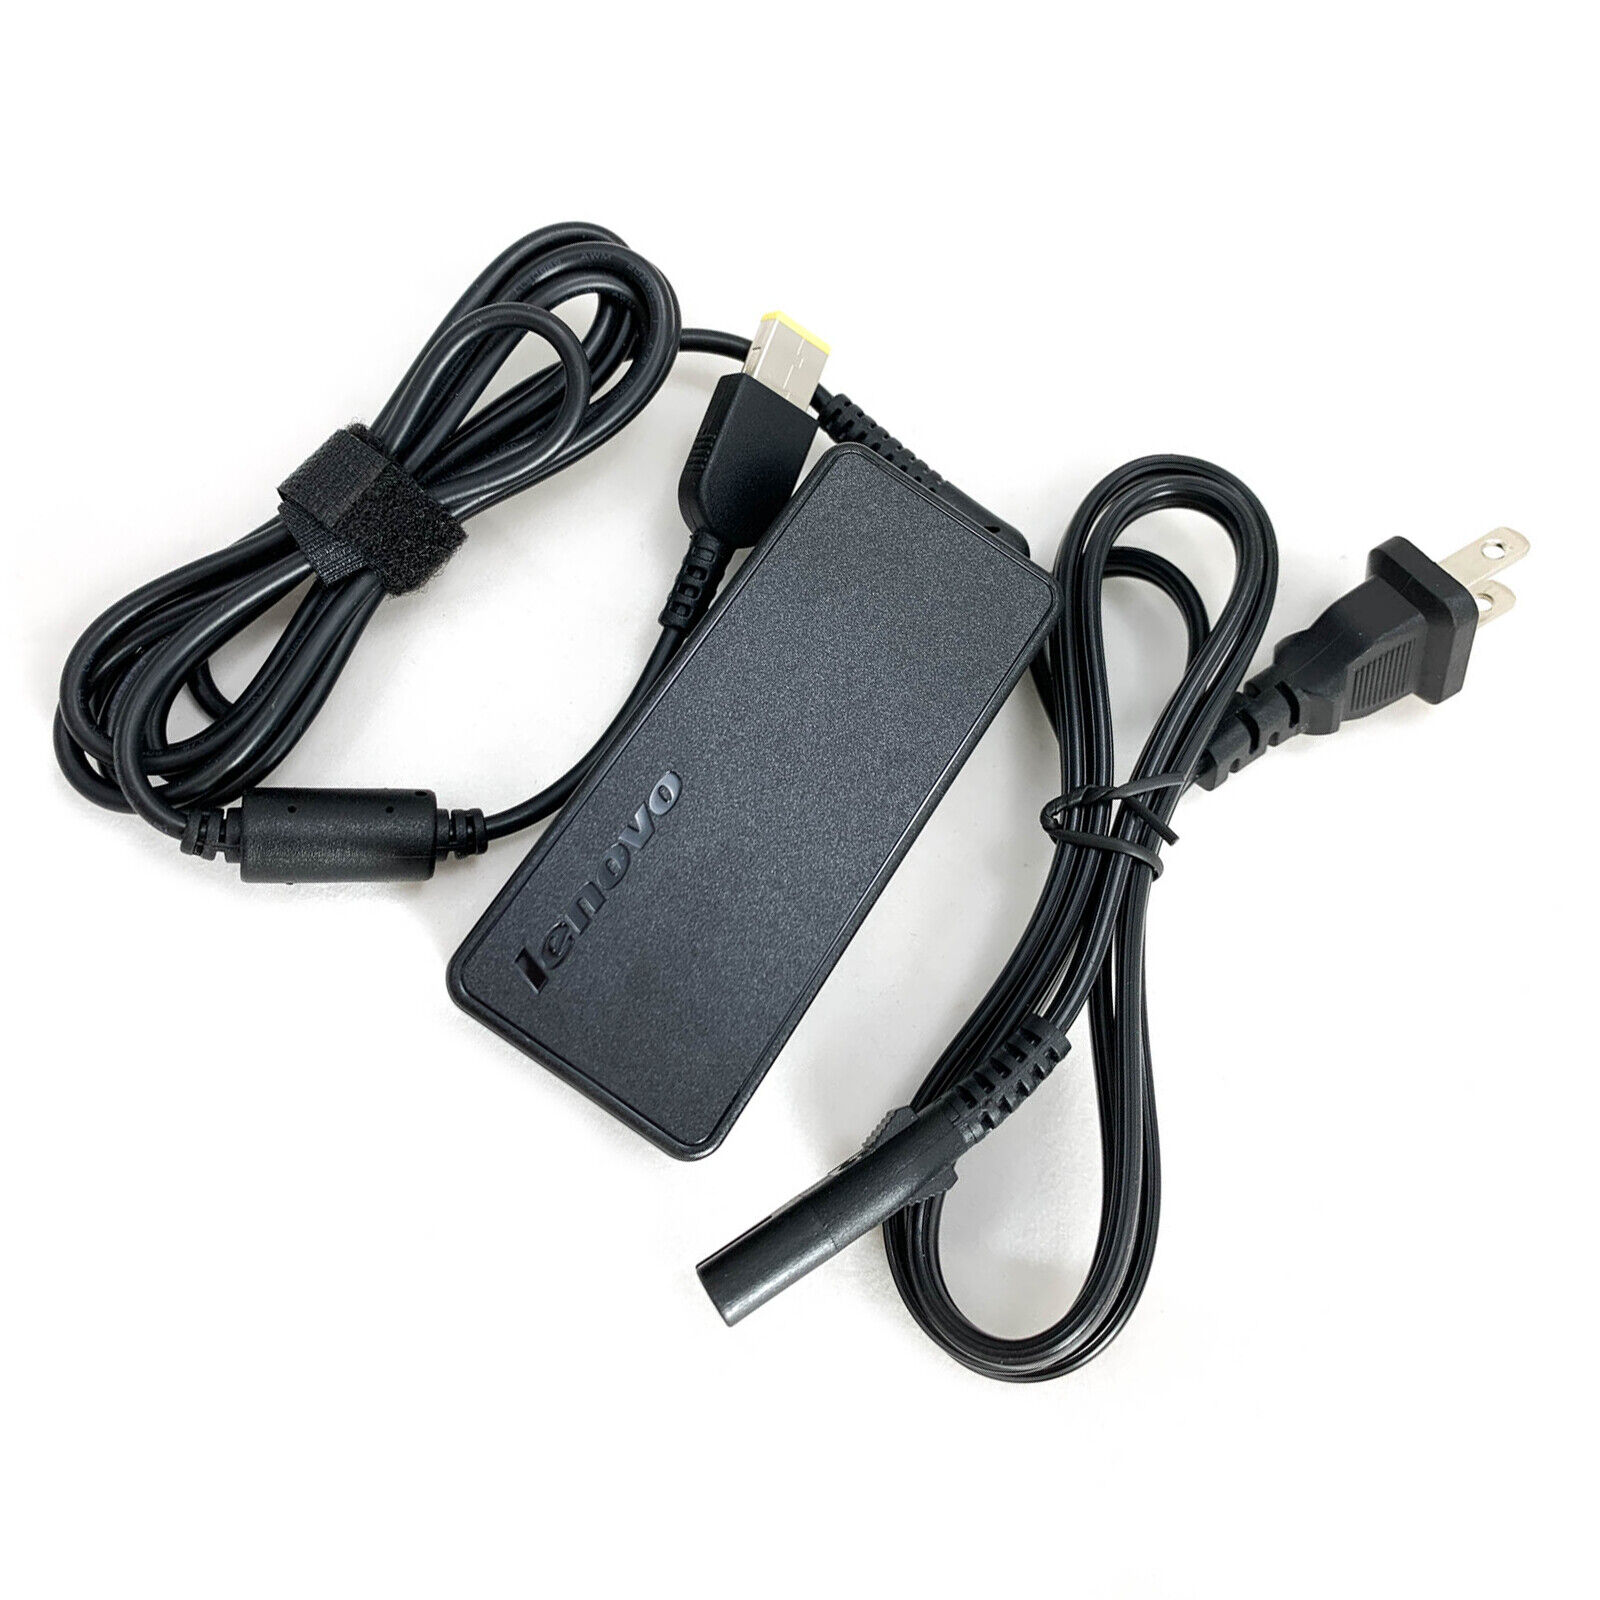 Genuine Lenovo 00HM615 AC/DC Power Supply Adapter 20V 2.25A 45W OEM Charger